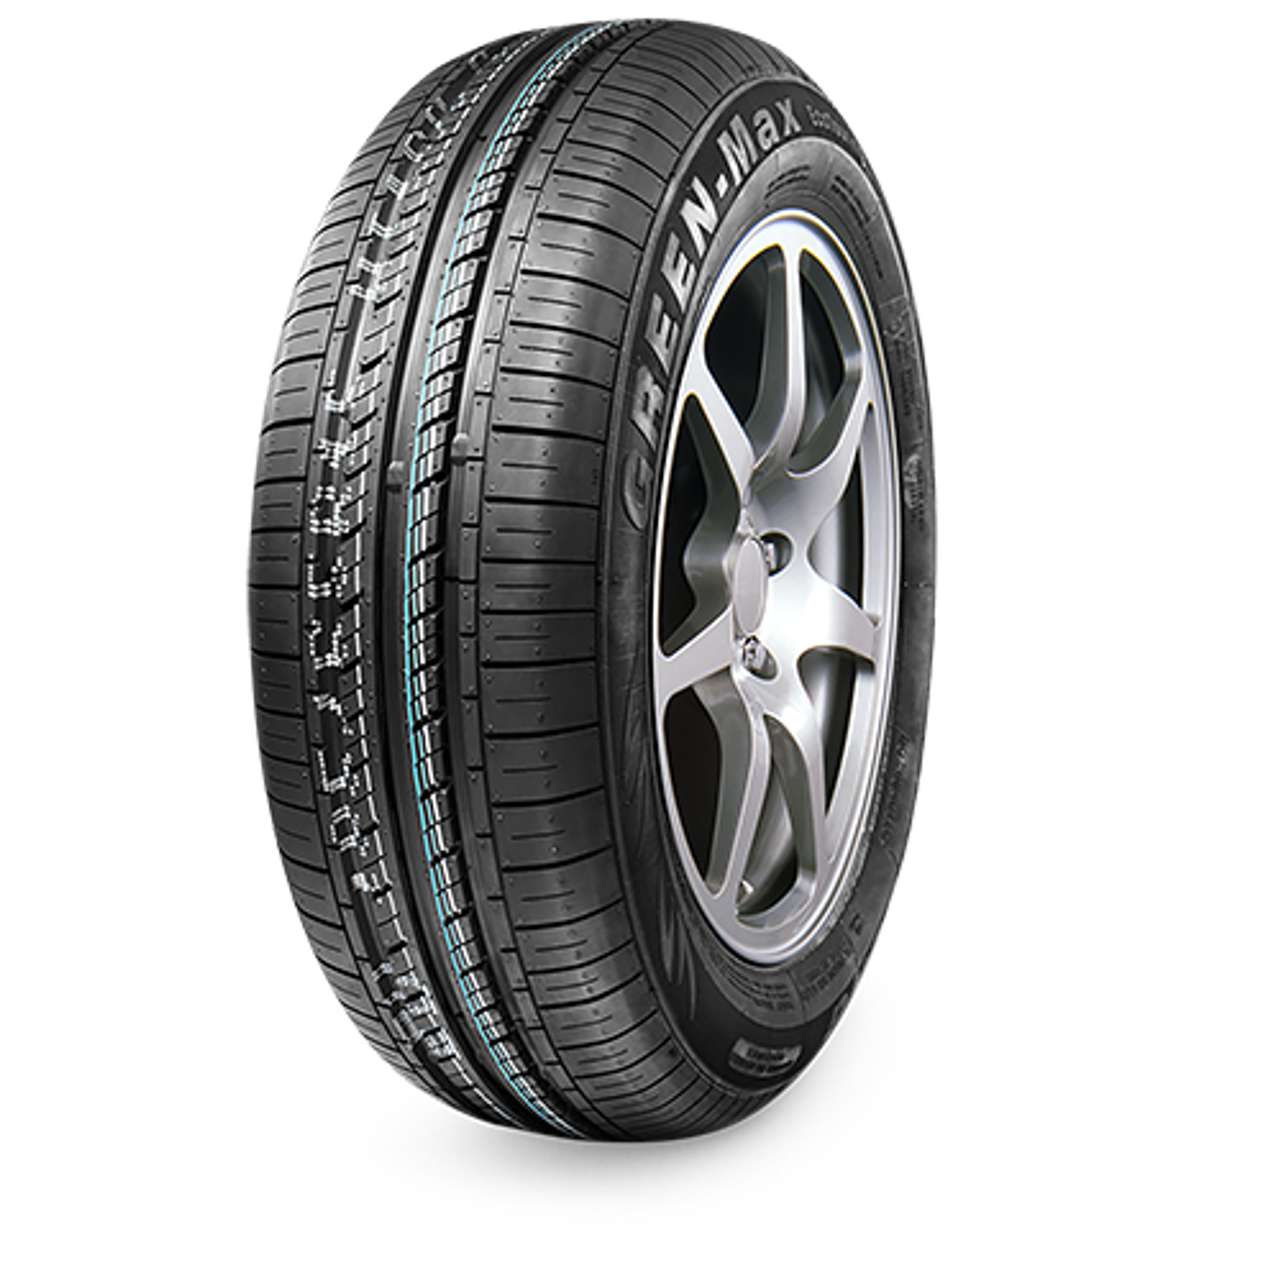 LINGLONG GREEN-MAX ECOTOURING 165/70R14 81T BSW